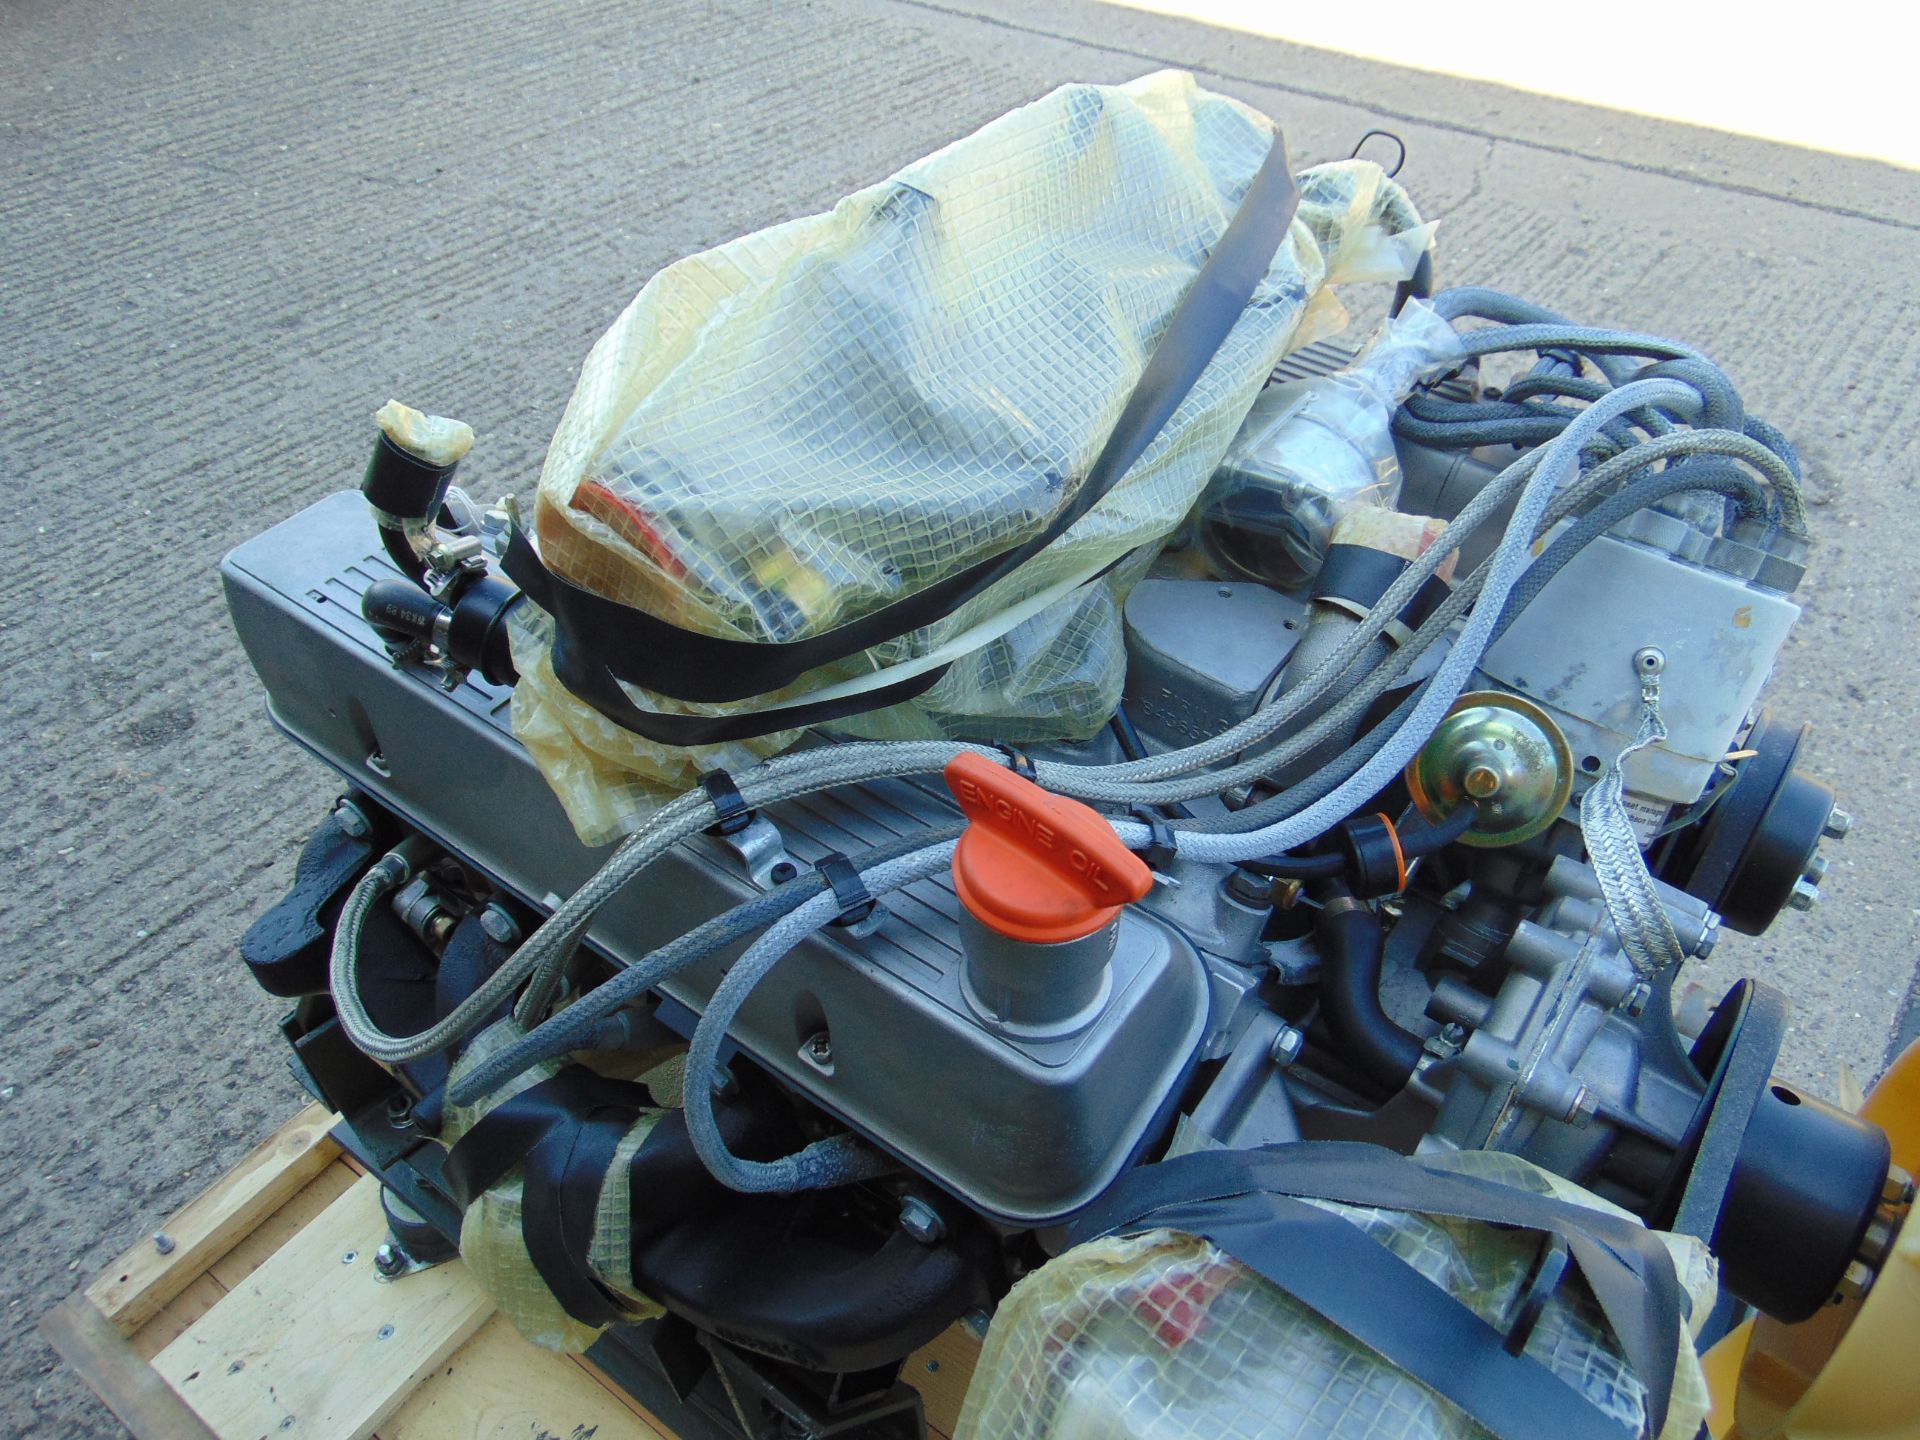 Fully Reconditioned Land Rover V8 Engine c/w all Accessories, as shown in Crate etc - Image 12 of 21